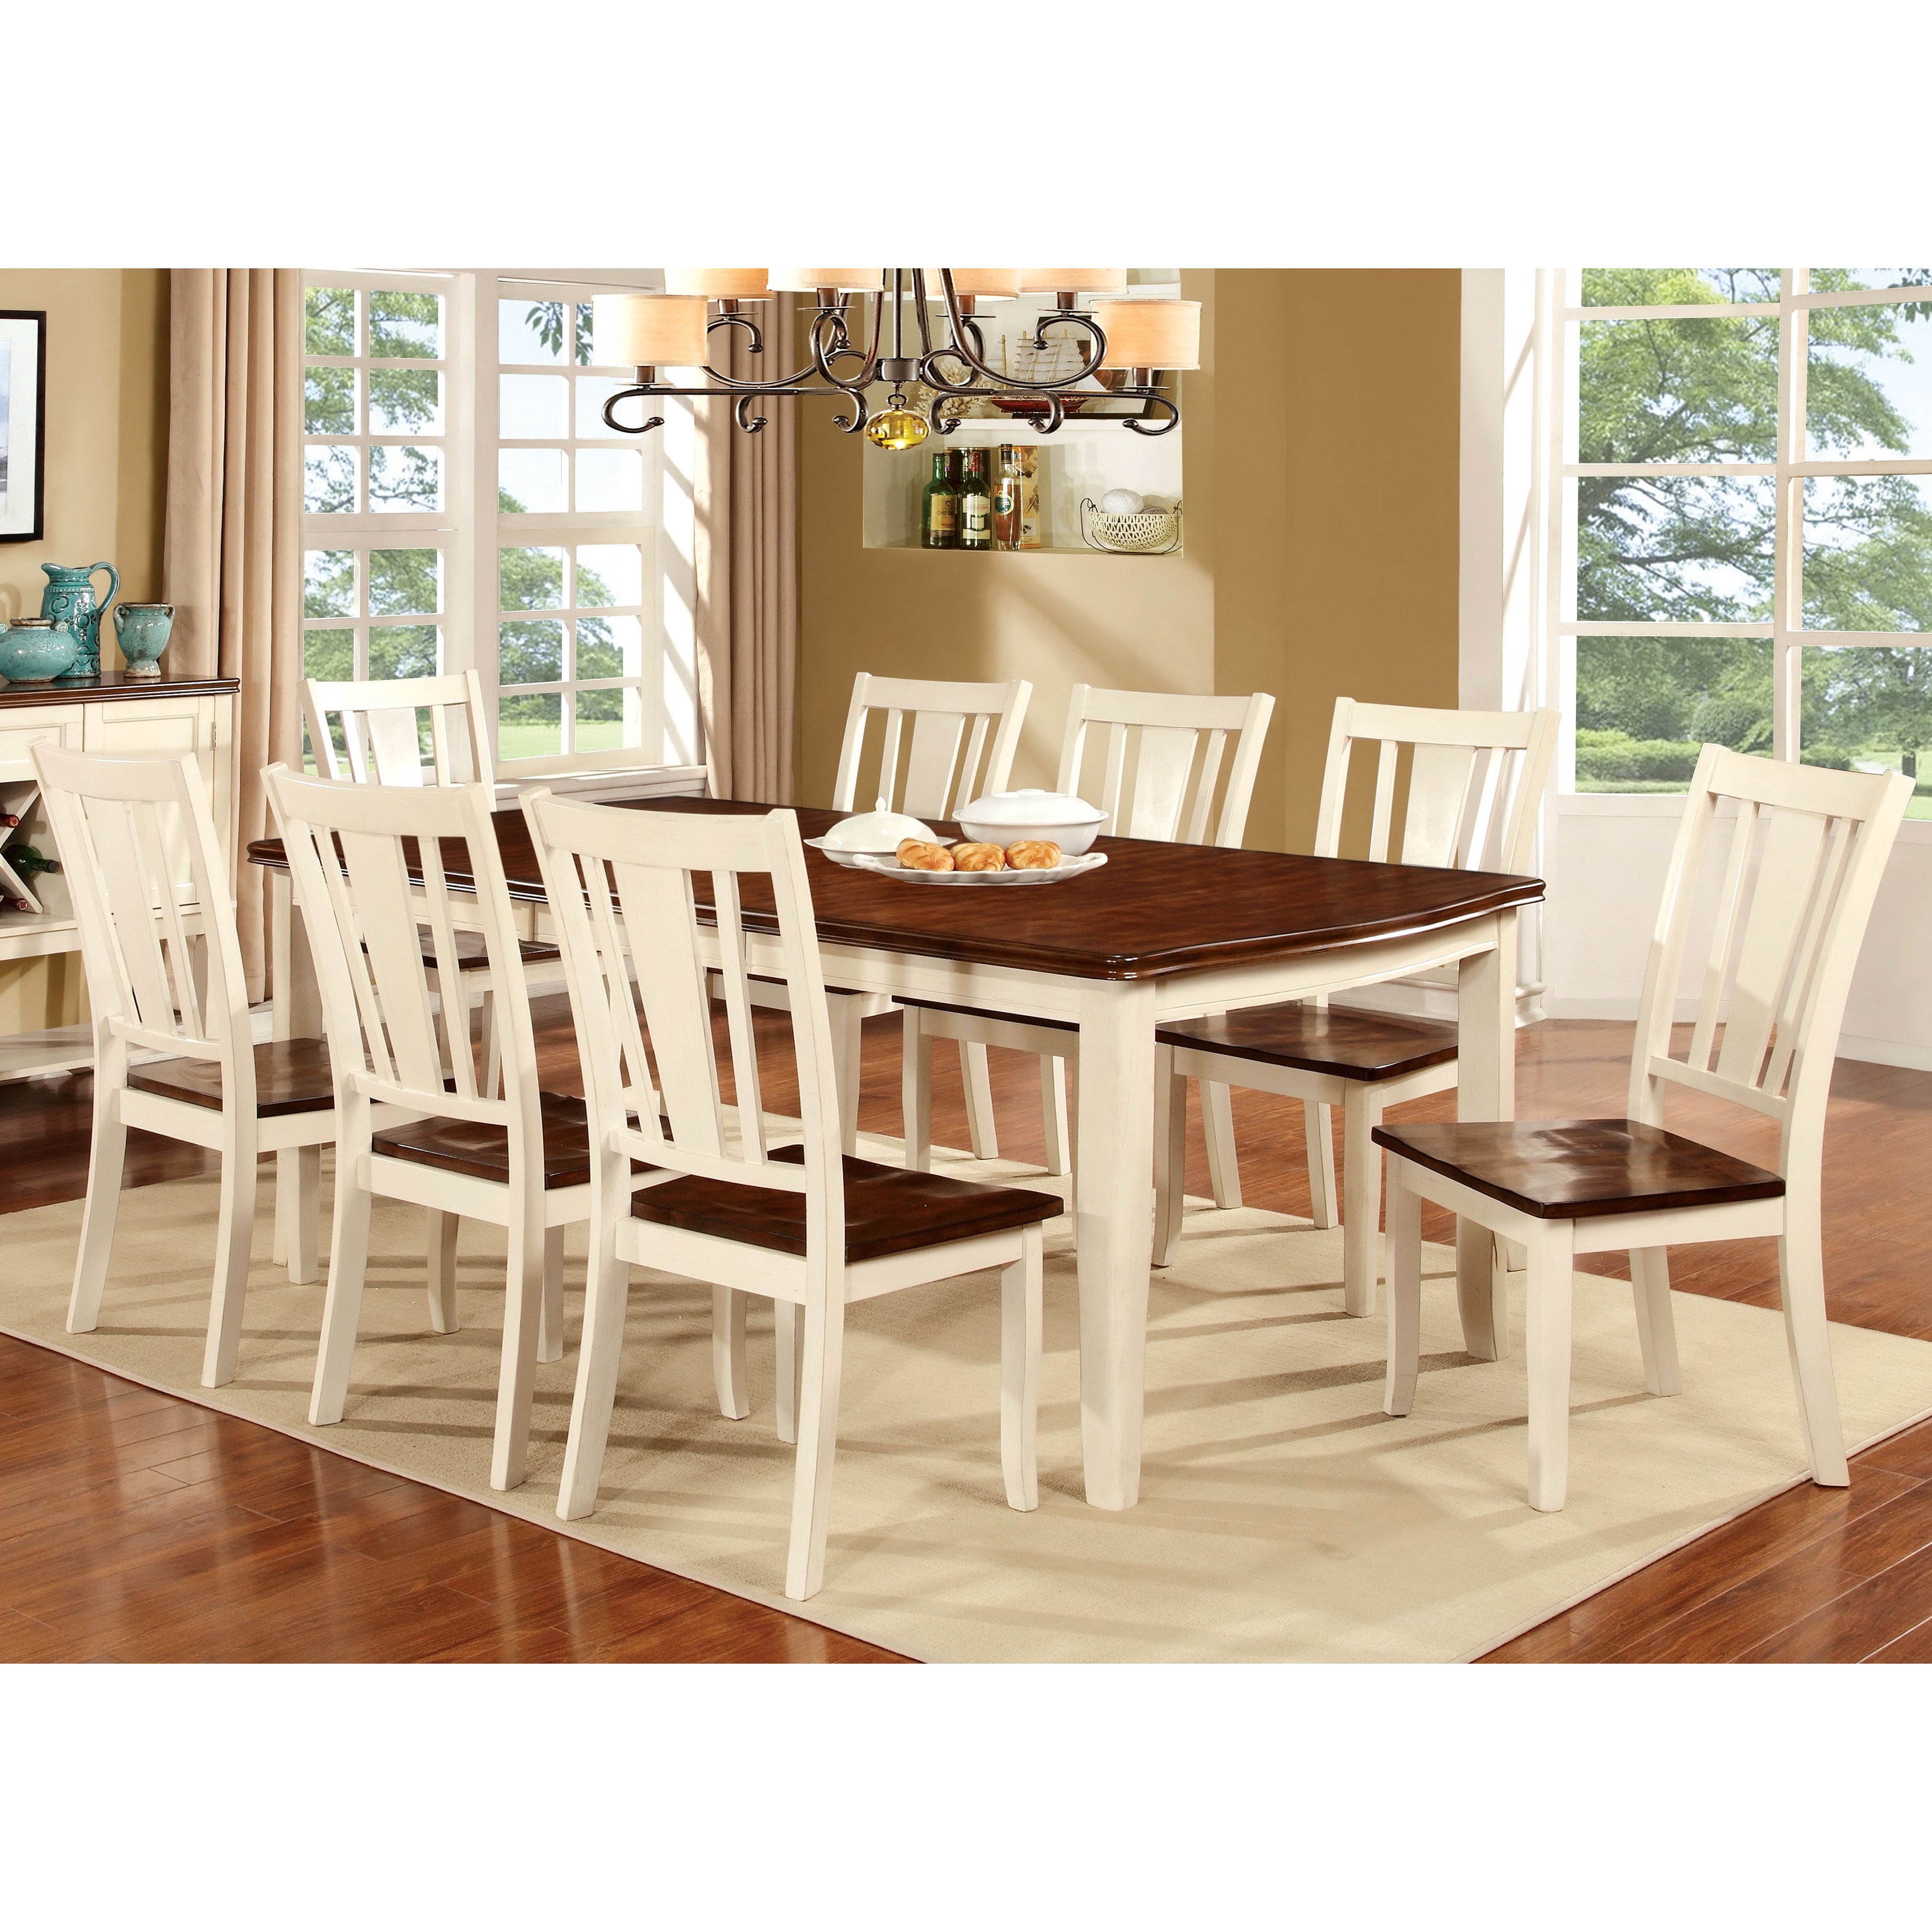 Furniture Of America Betsy Jane Country Style Dining Table Free